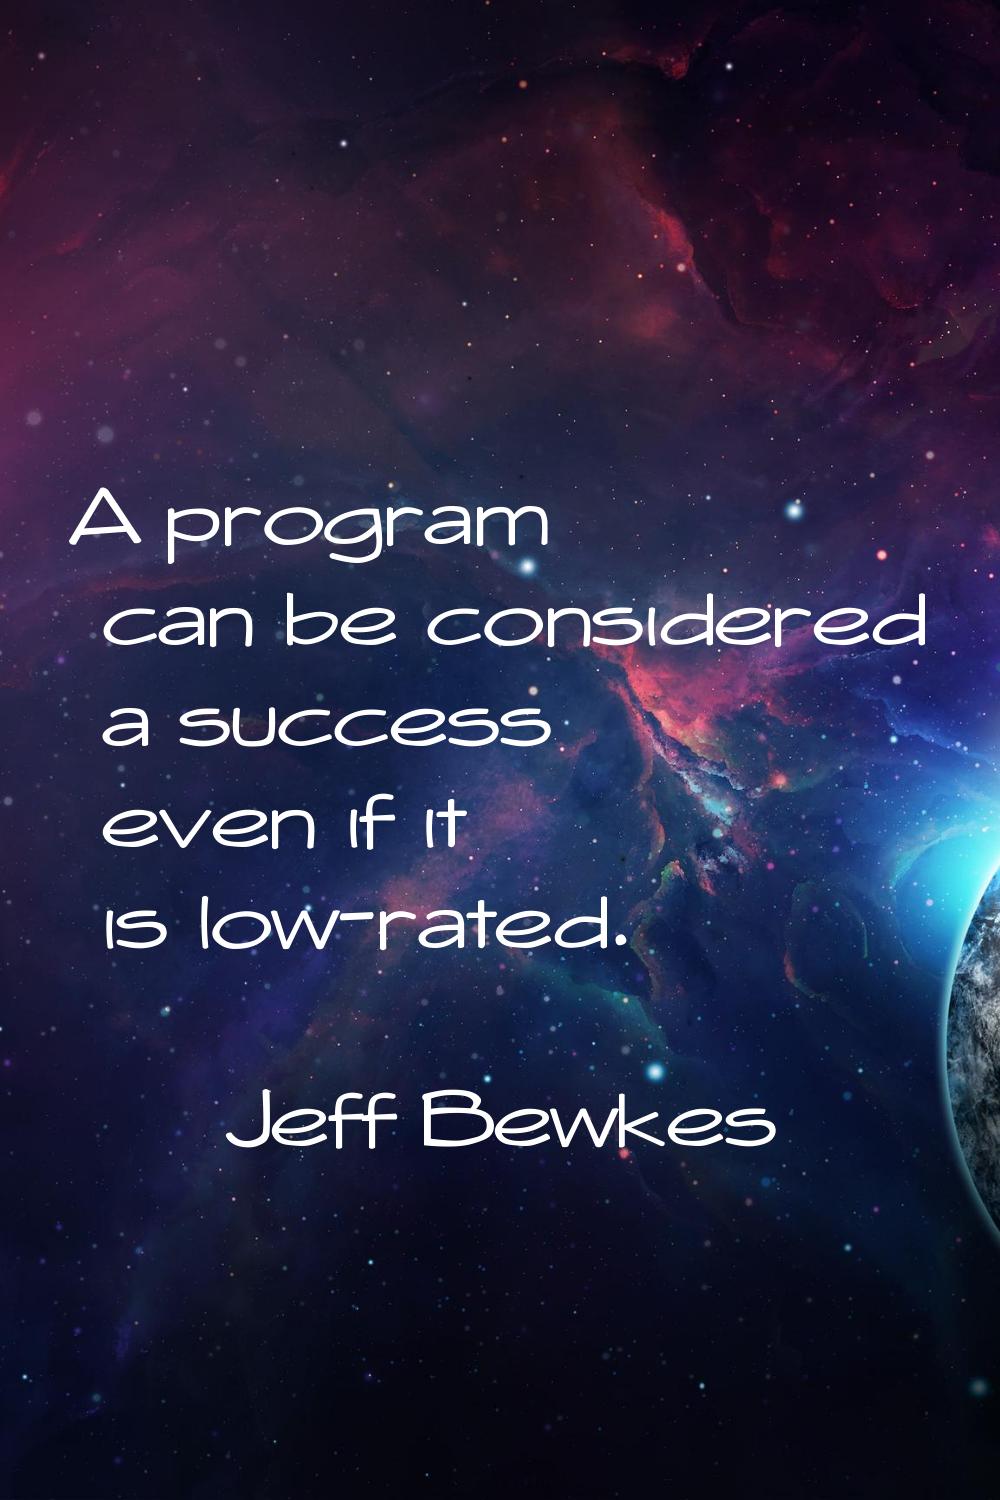 A program can be considered a success even if it is low-rated.